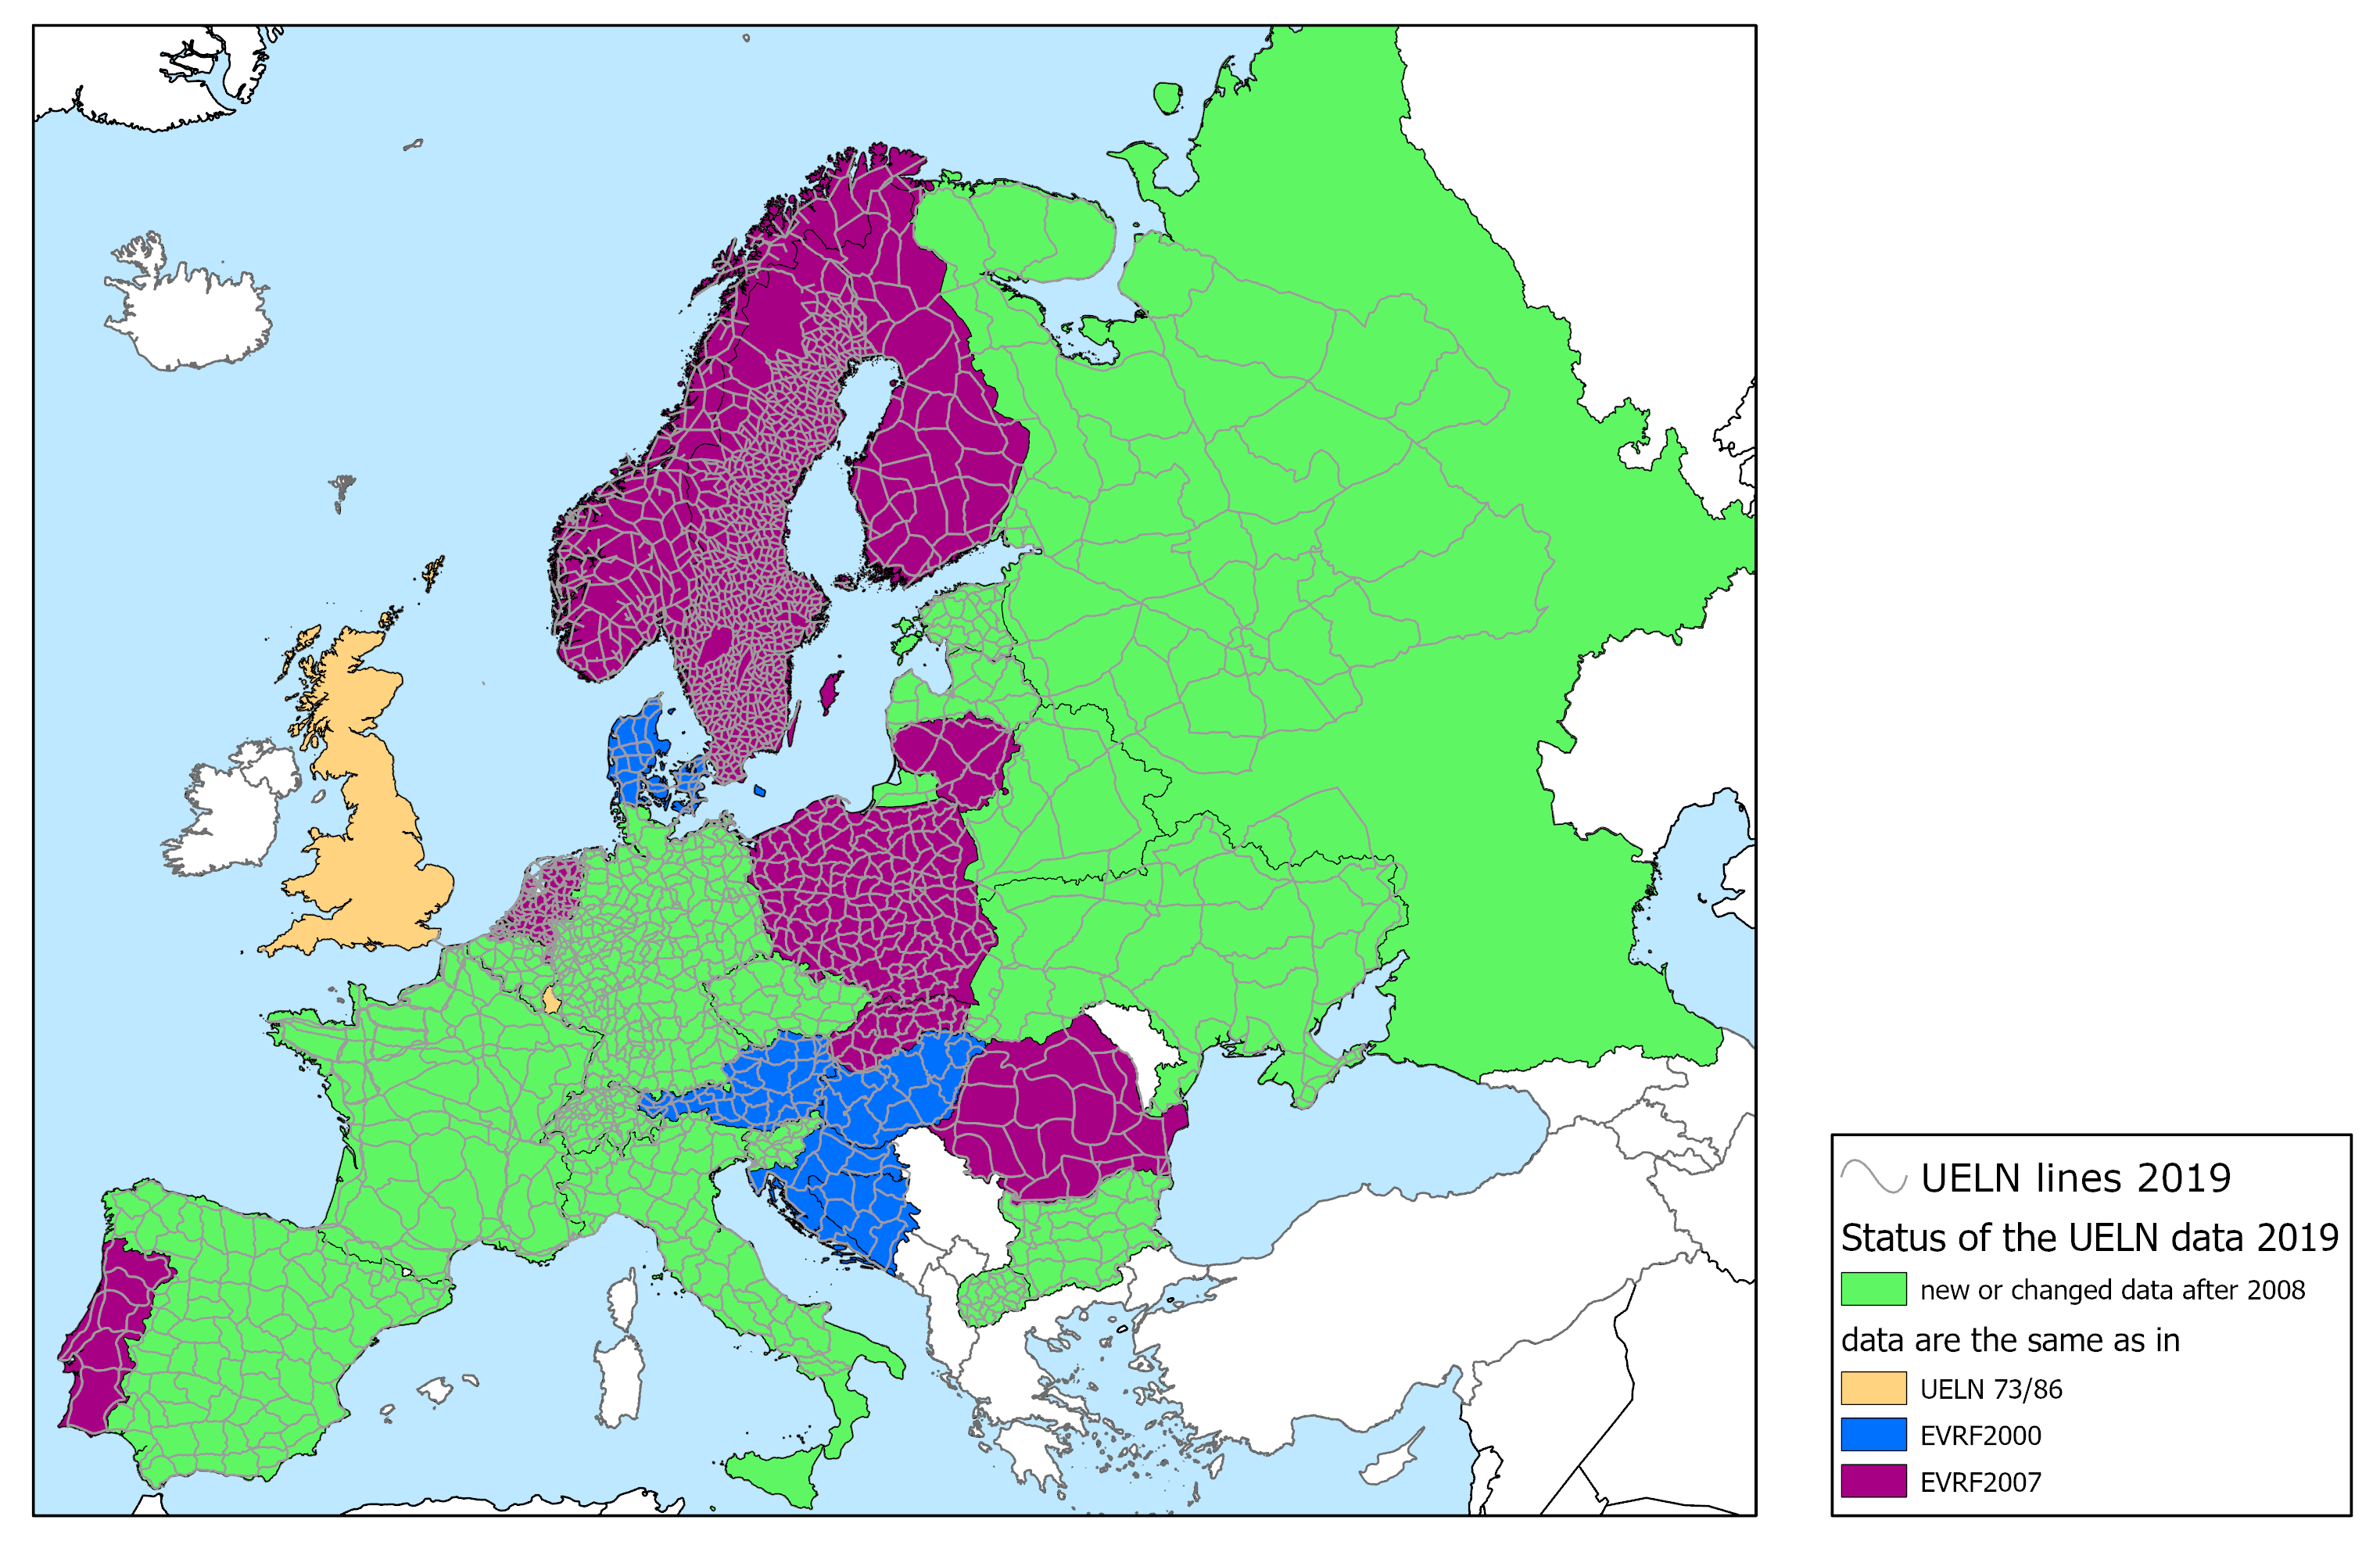 Picture shows in a map the status of the UELN data 2019